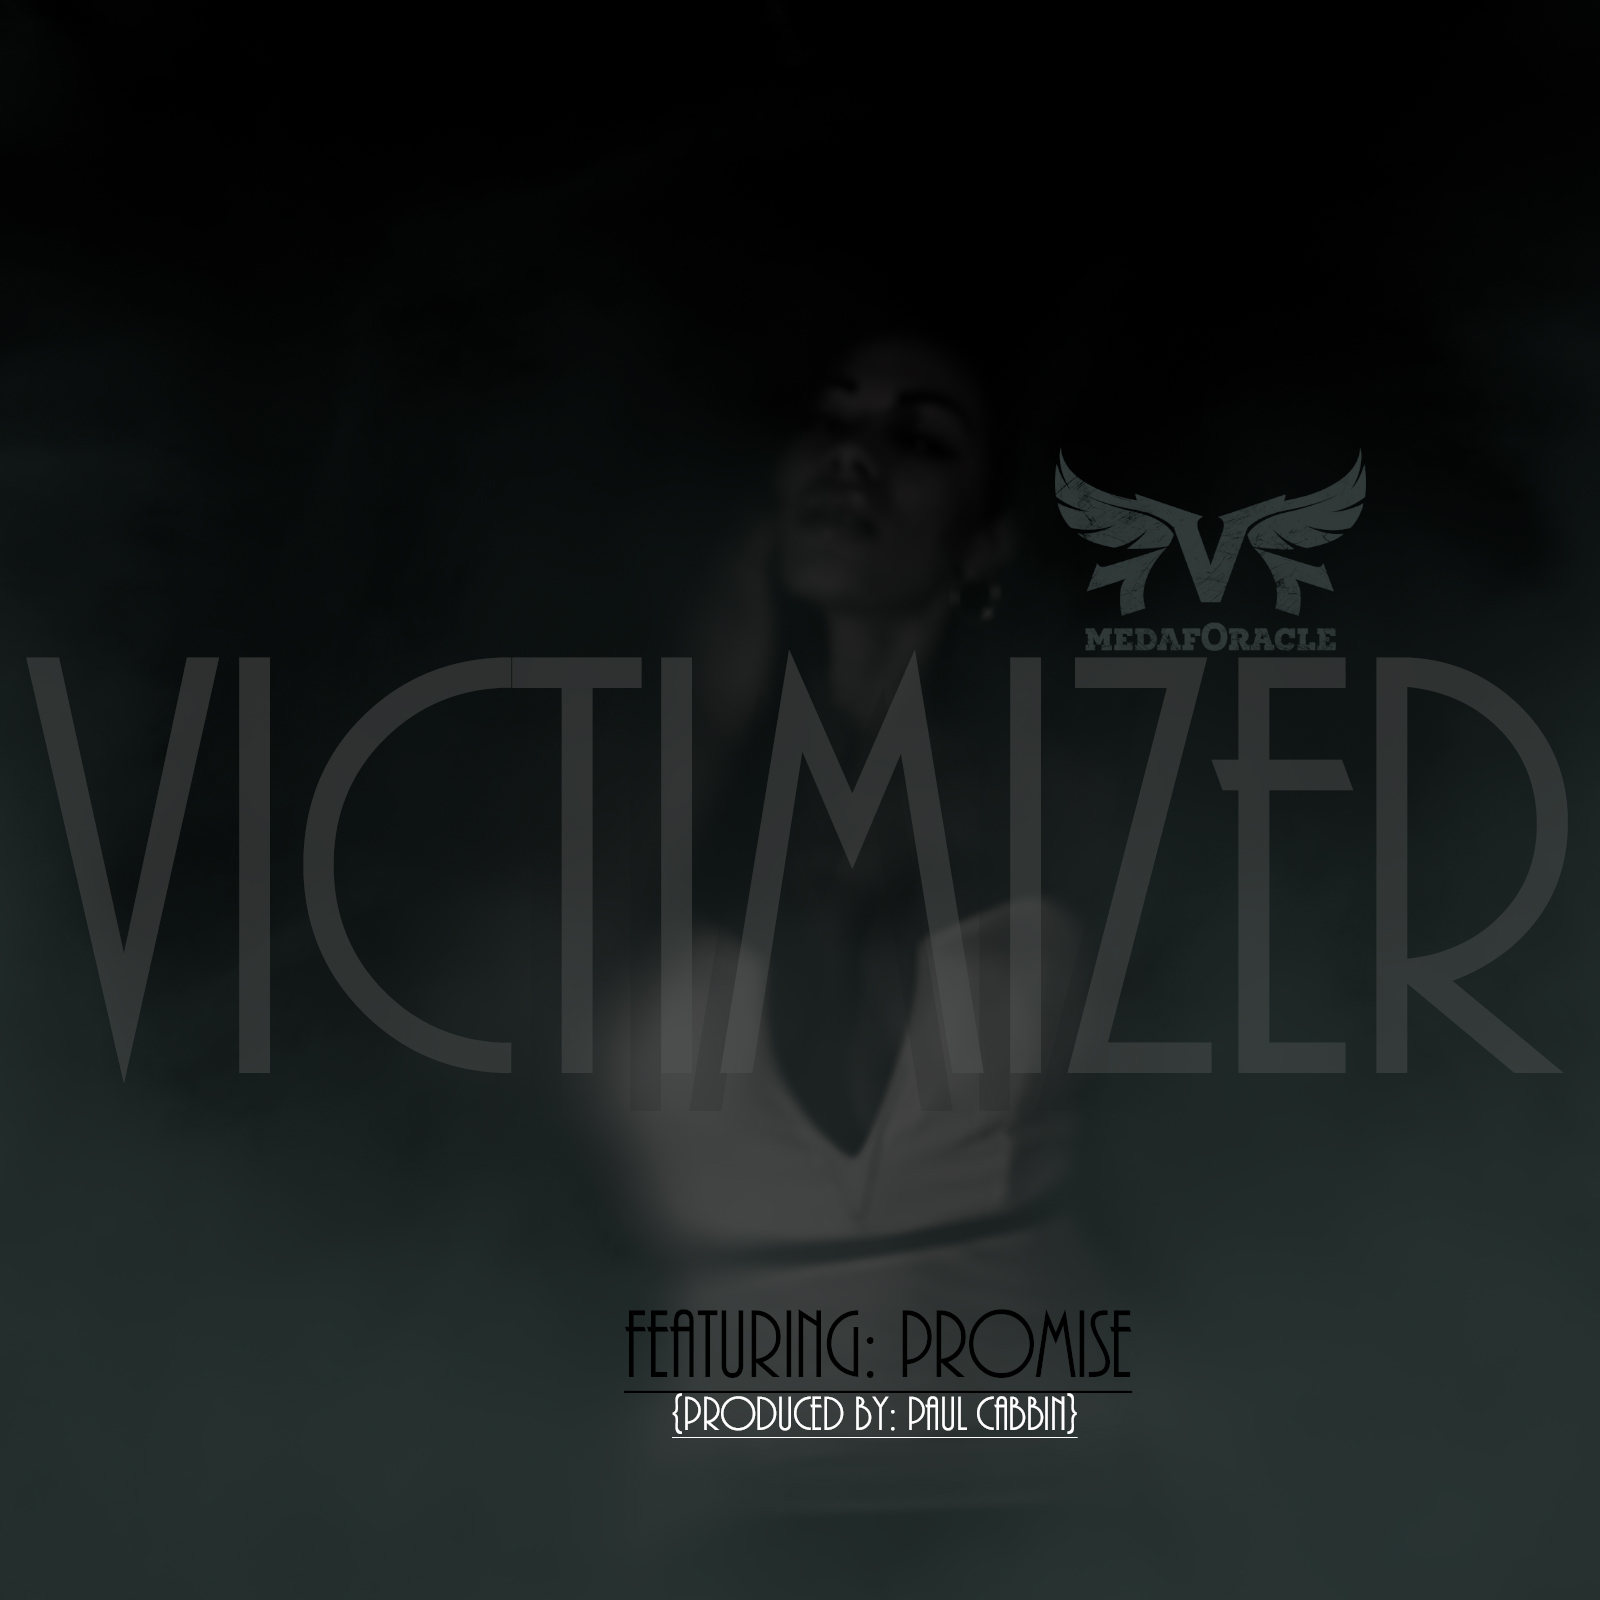 medafOracle – Victimizer Featuring Promise